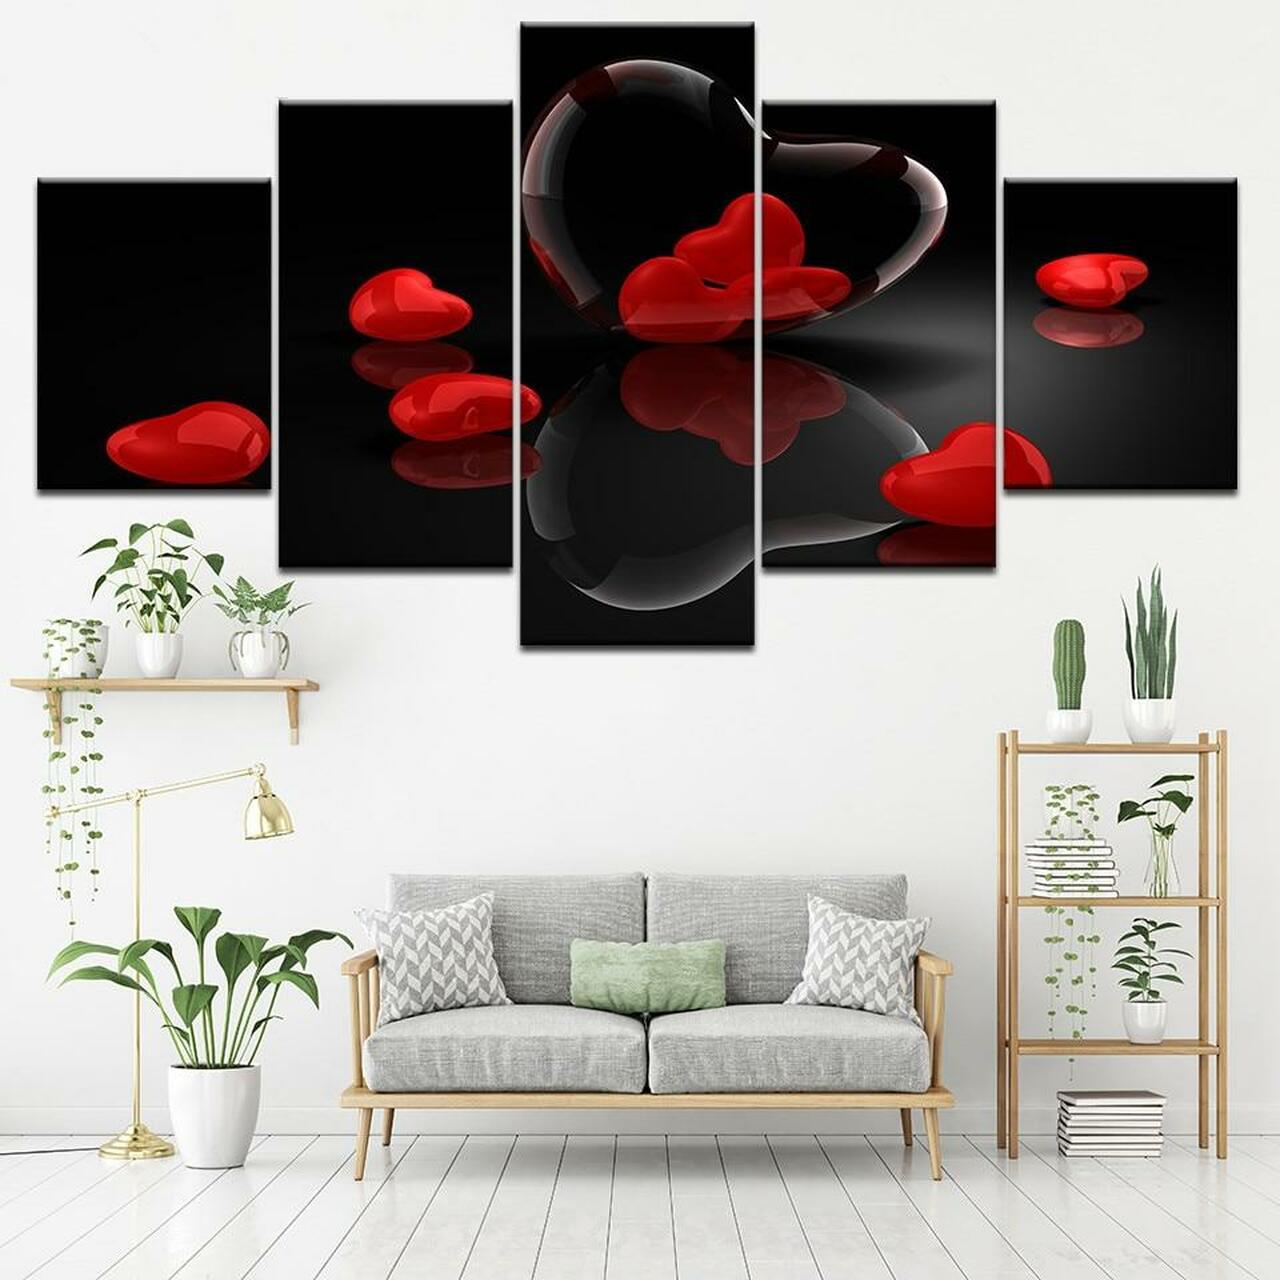 Red Hearts 5 Piece Canvas Art Wall Decor